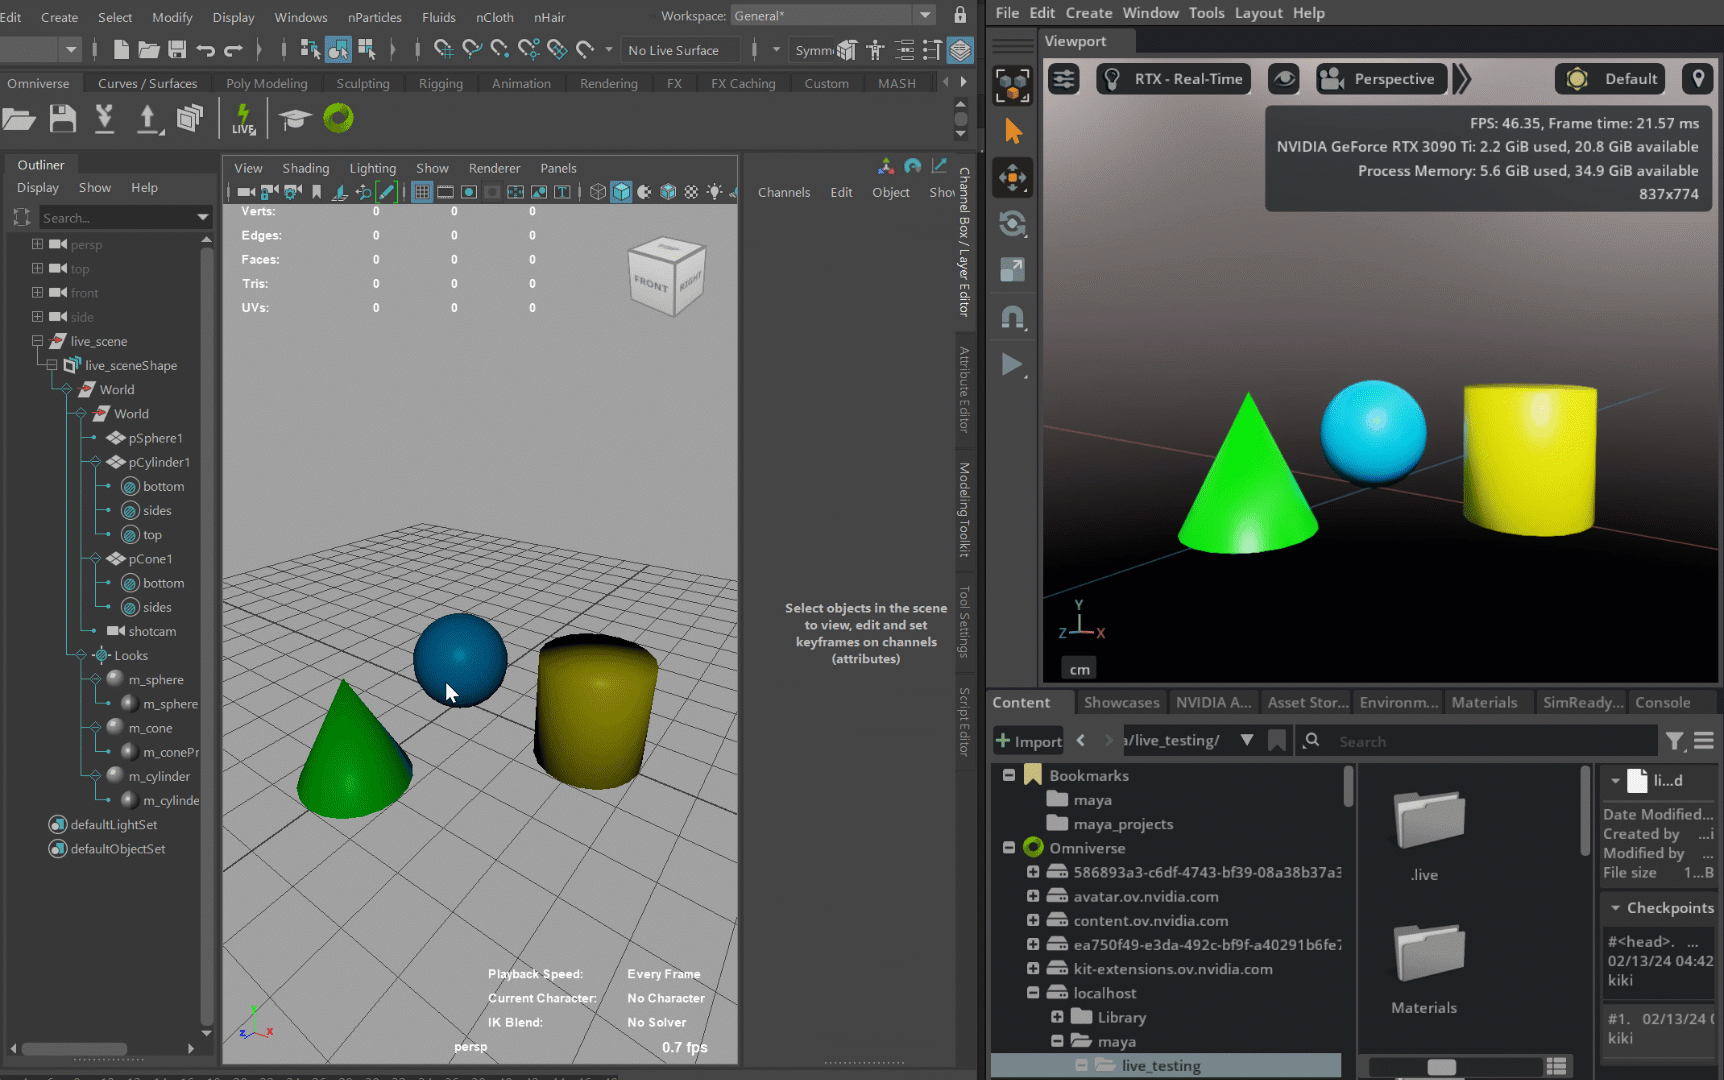 Animated demo gif showing bi-directional Live Session sync between Maya and USD Composer.